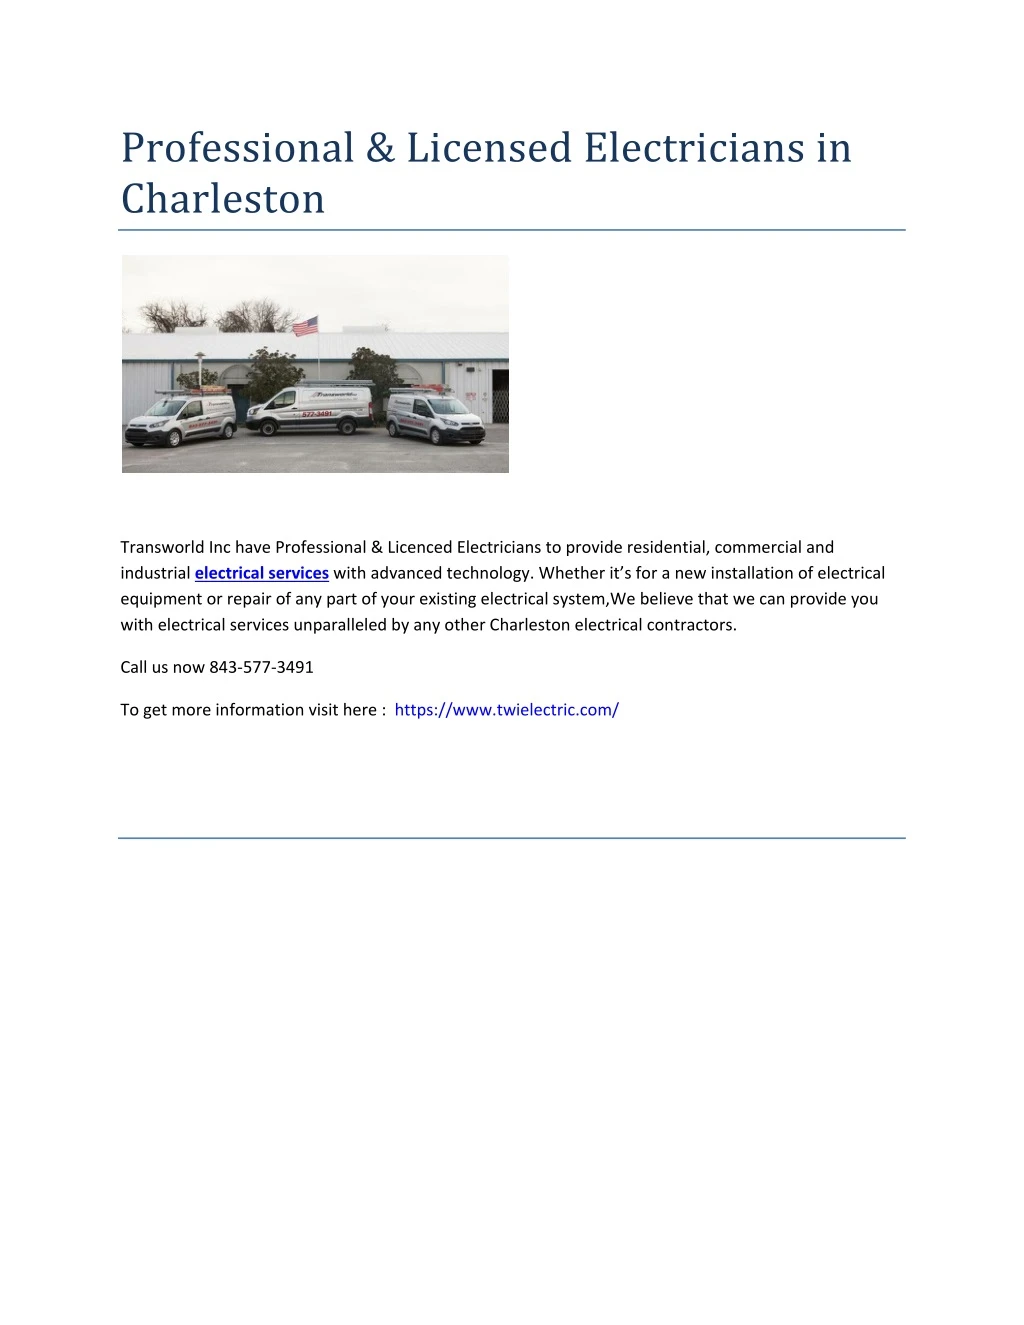 professional licensed electricians in charleston